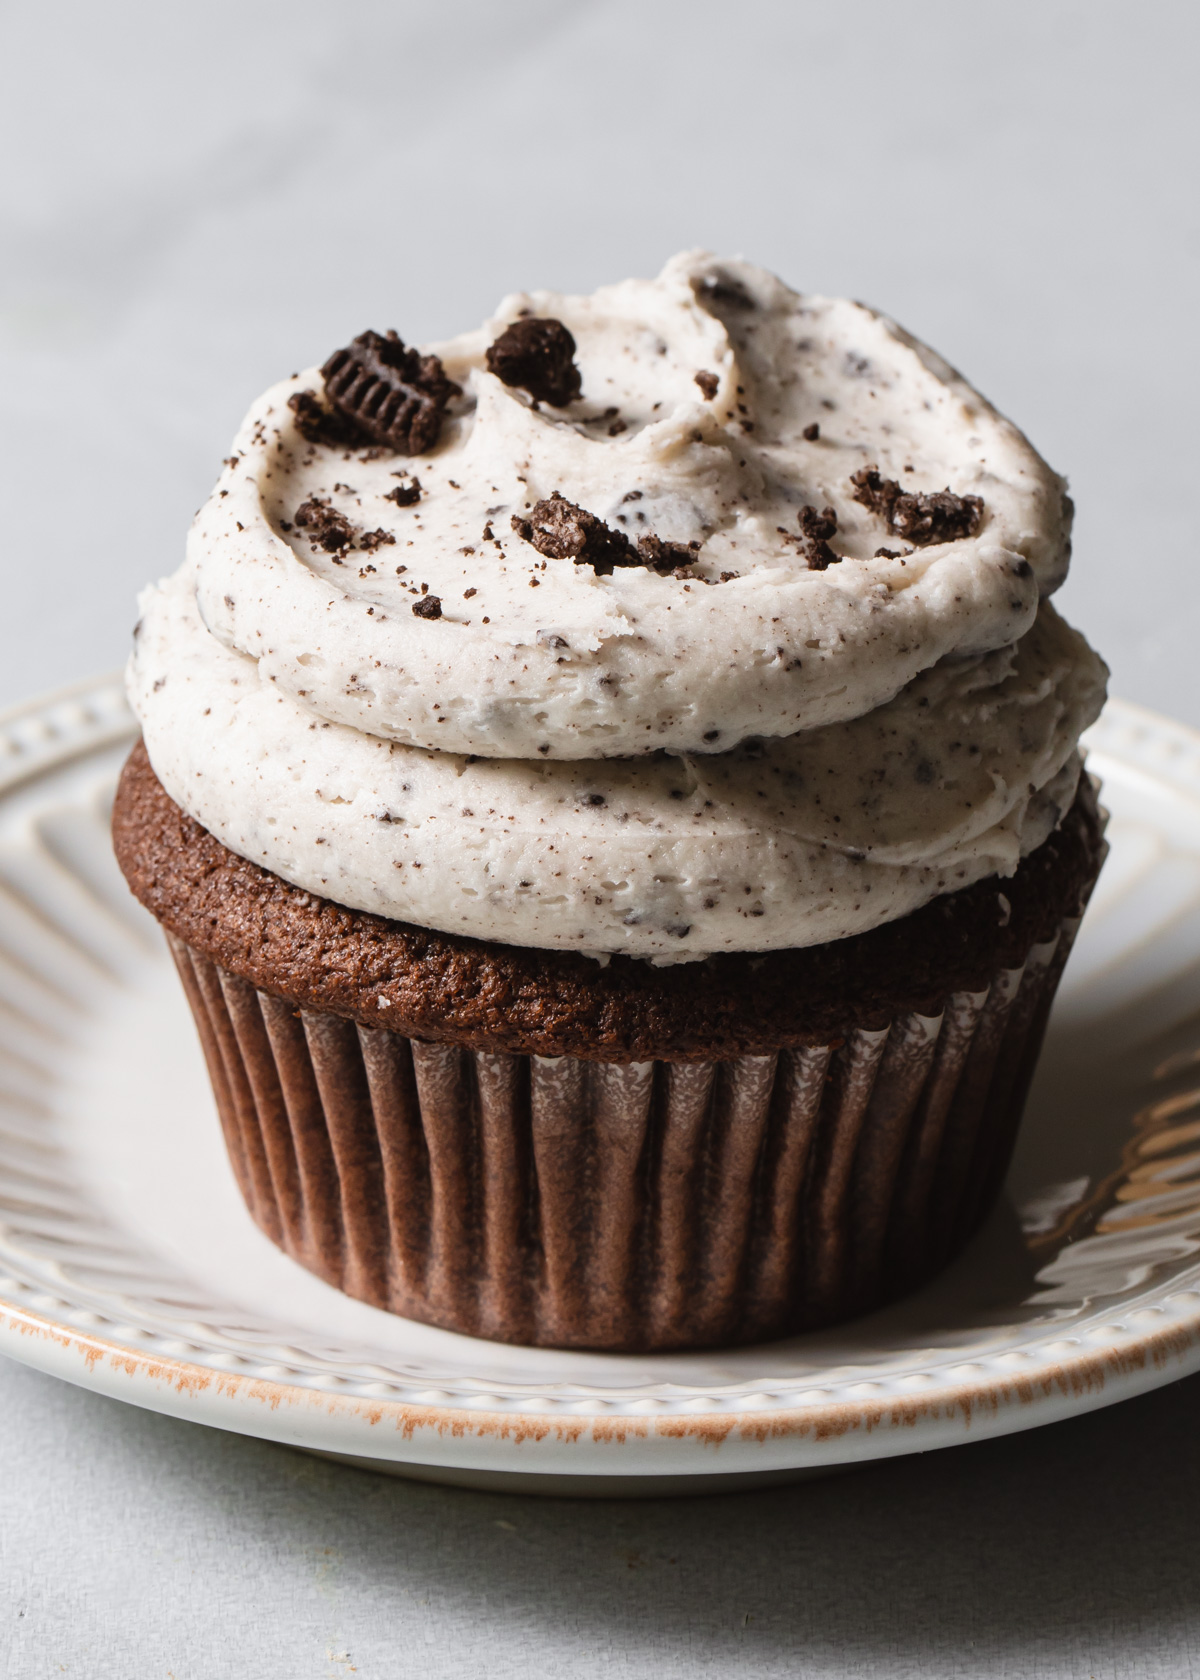 A chocolate cupcake with chocolate cookie frosting on top